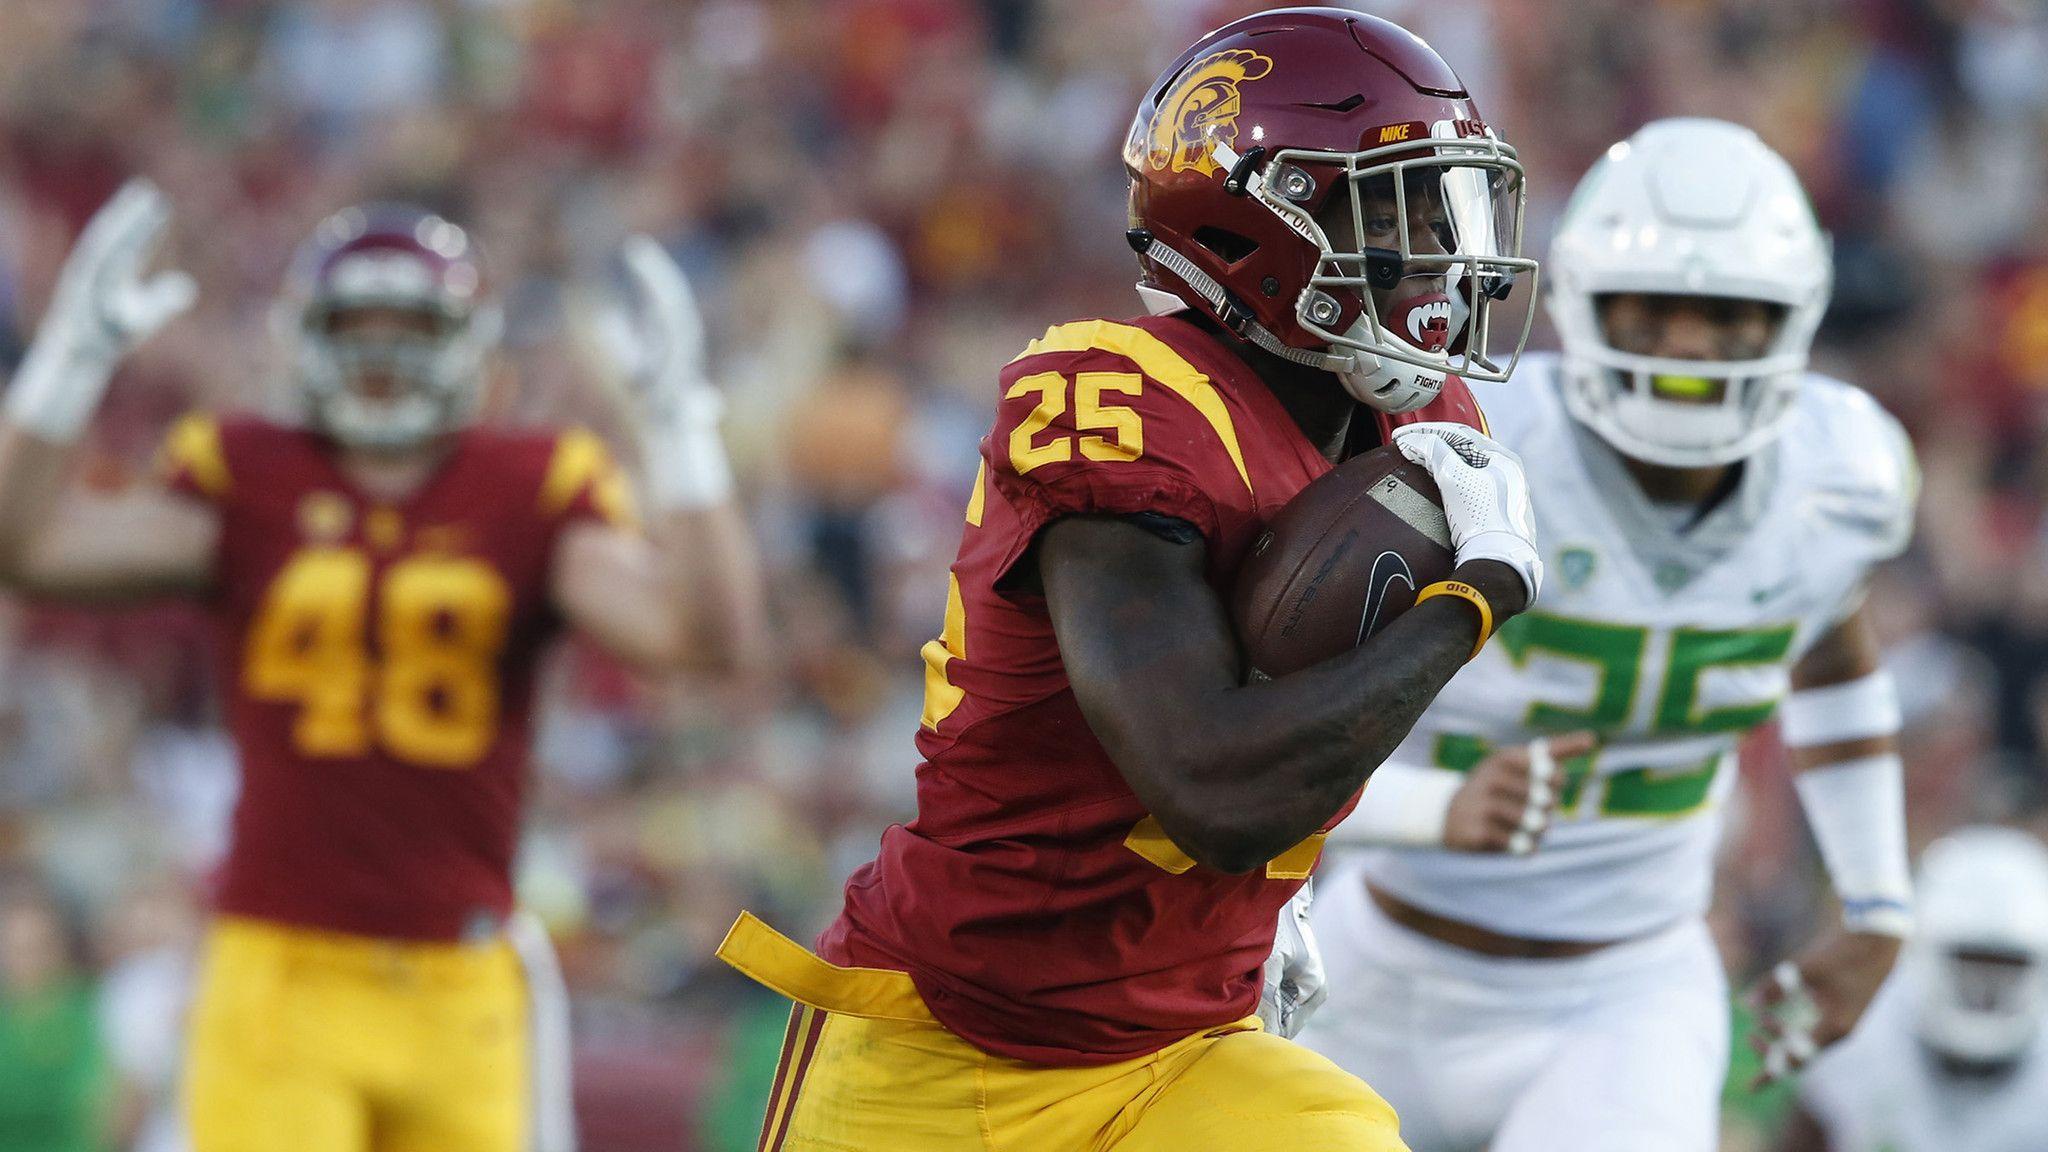 It's hair today, gone (for touchdowns) tomorrow for USC's Ronald